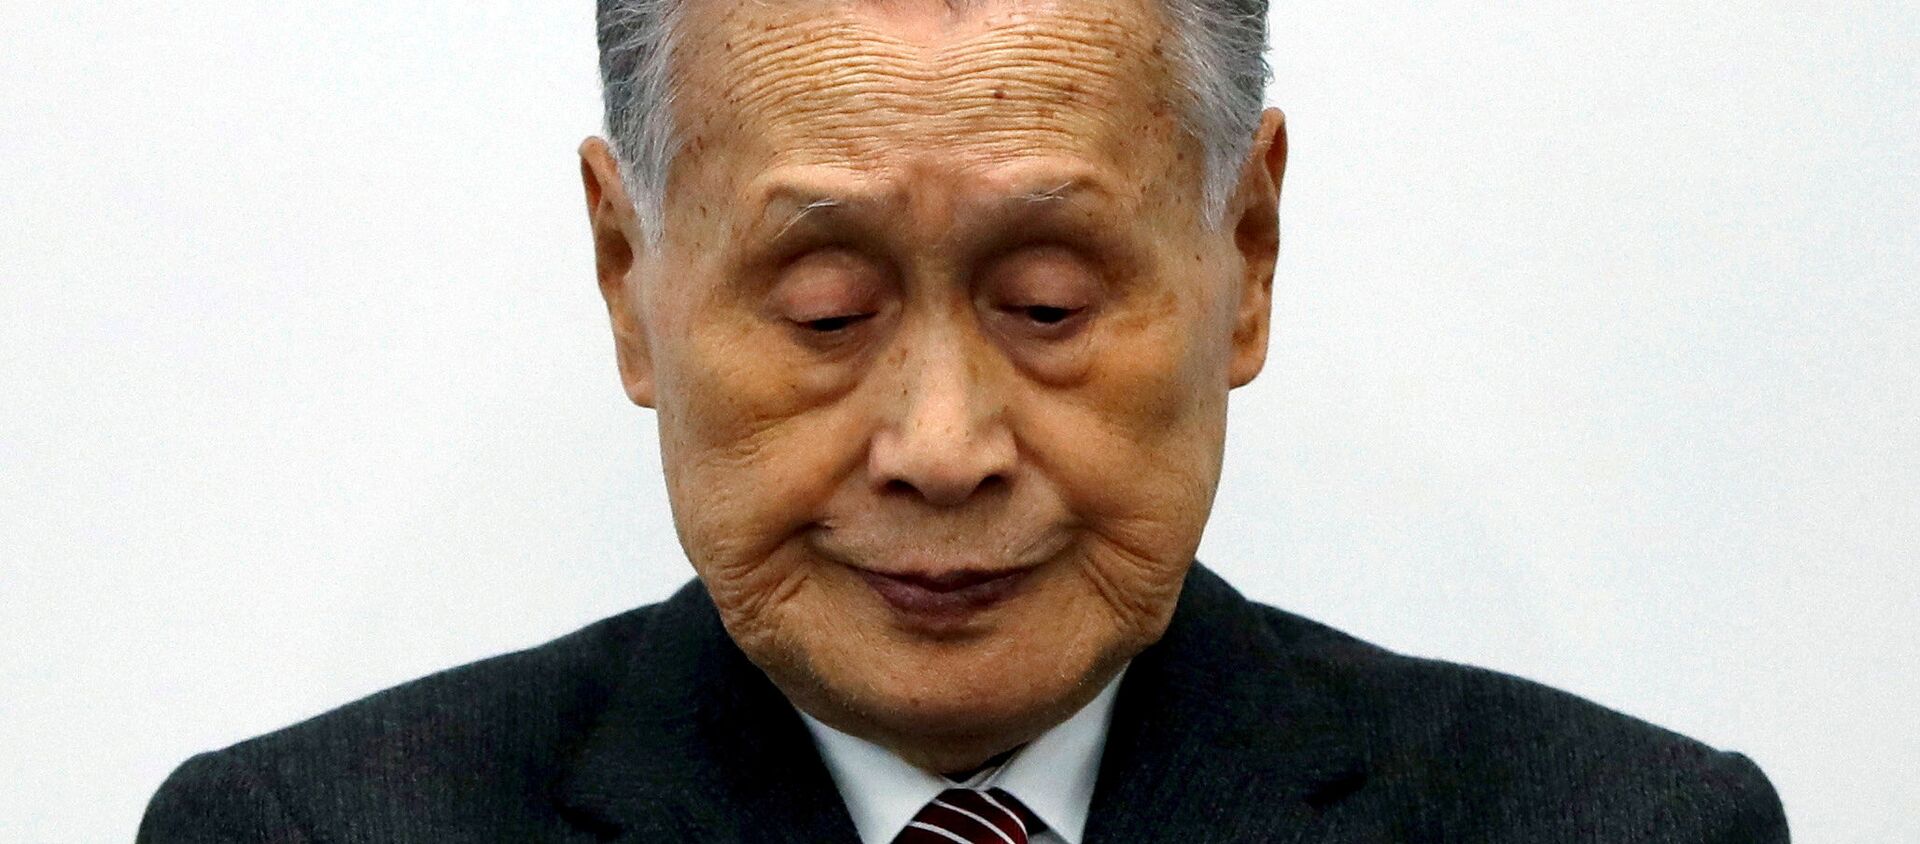 FILE PHOTO: Yoshiro Mori, President of the Tokyo 2020 Olympic Games Organising Committee, attends a news conference in Tokyo, Japan March 23, 2020 - Sputnik International, 1920, 12.02.2021